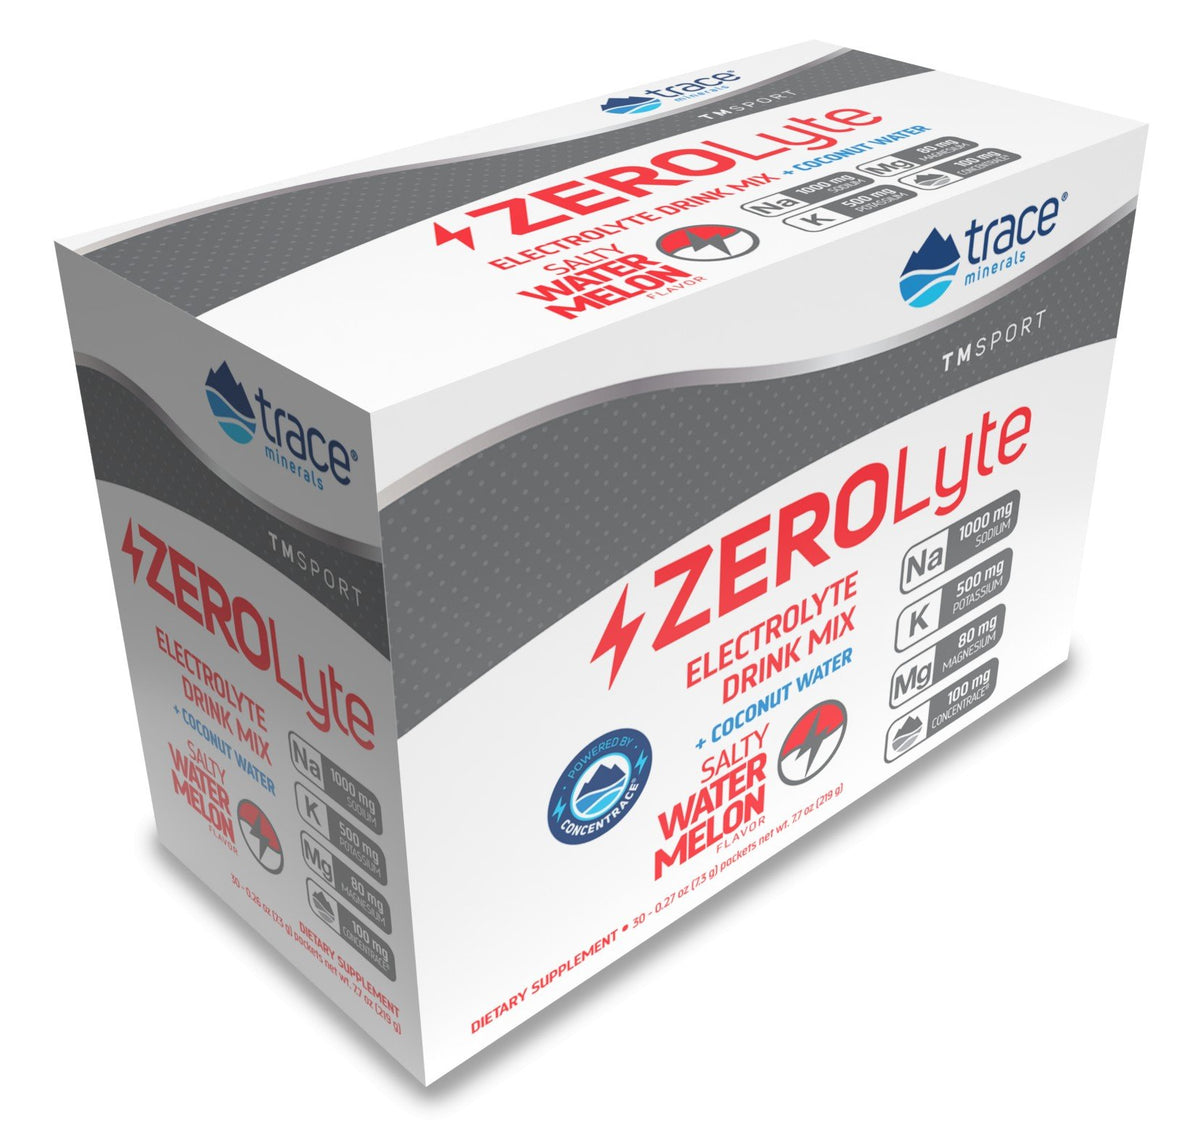 Trace Minerals TMSPORT-ZeroLyte-Electrolyte Drink Mix + Coconut Water-ZeroLyte-Salty Watermelon Flavor 30 Packets Box